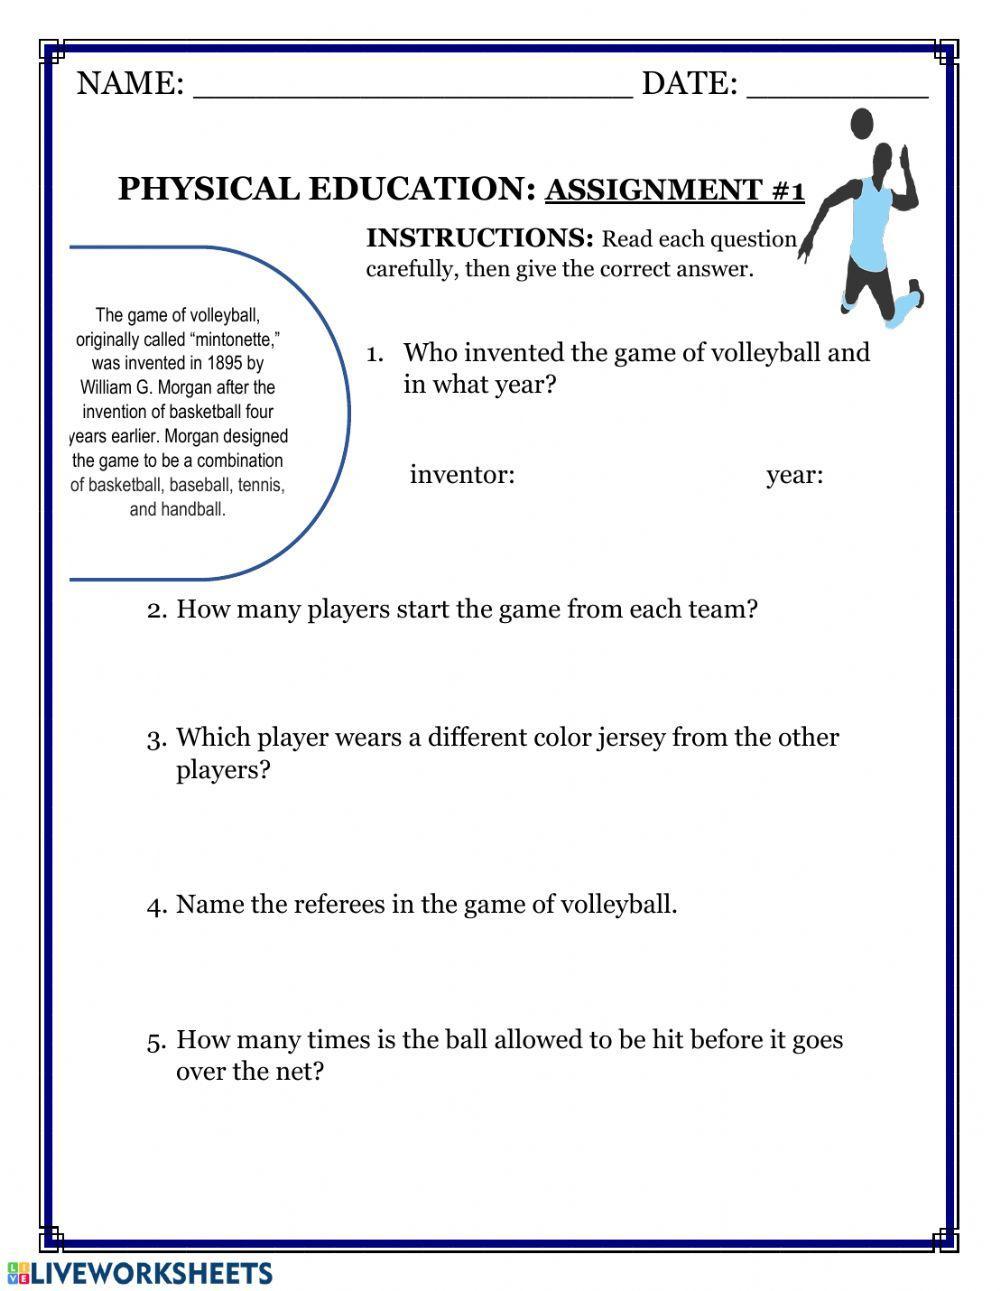 Mr. Lightbourne's Physical Education Assignment